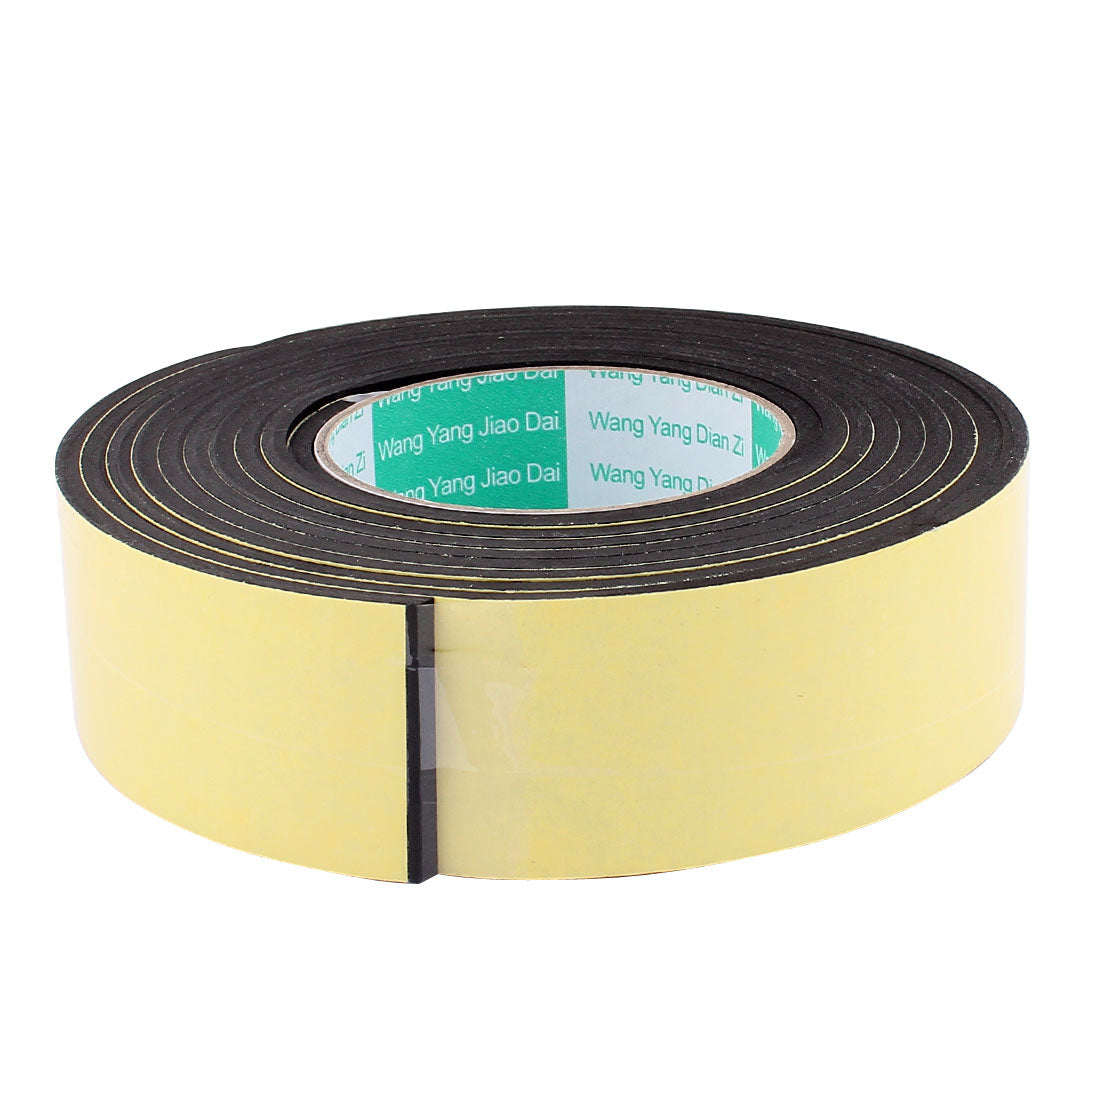 uxcell Uxcell 2 Pcs 45mmx4mm Single Sided Sponge Tape Adhesive Sticker Foam Glue Strip Sealing 3 Meters 10Ft